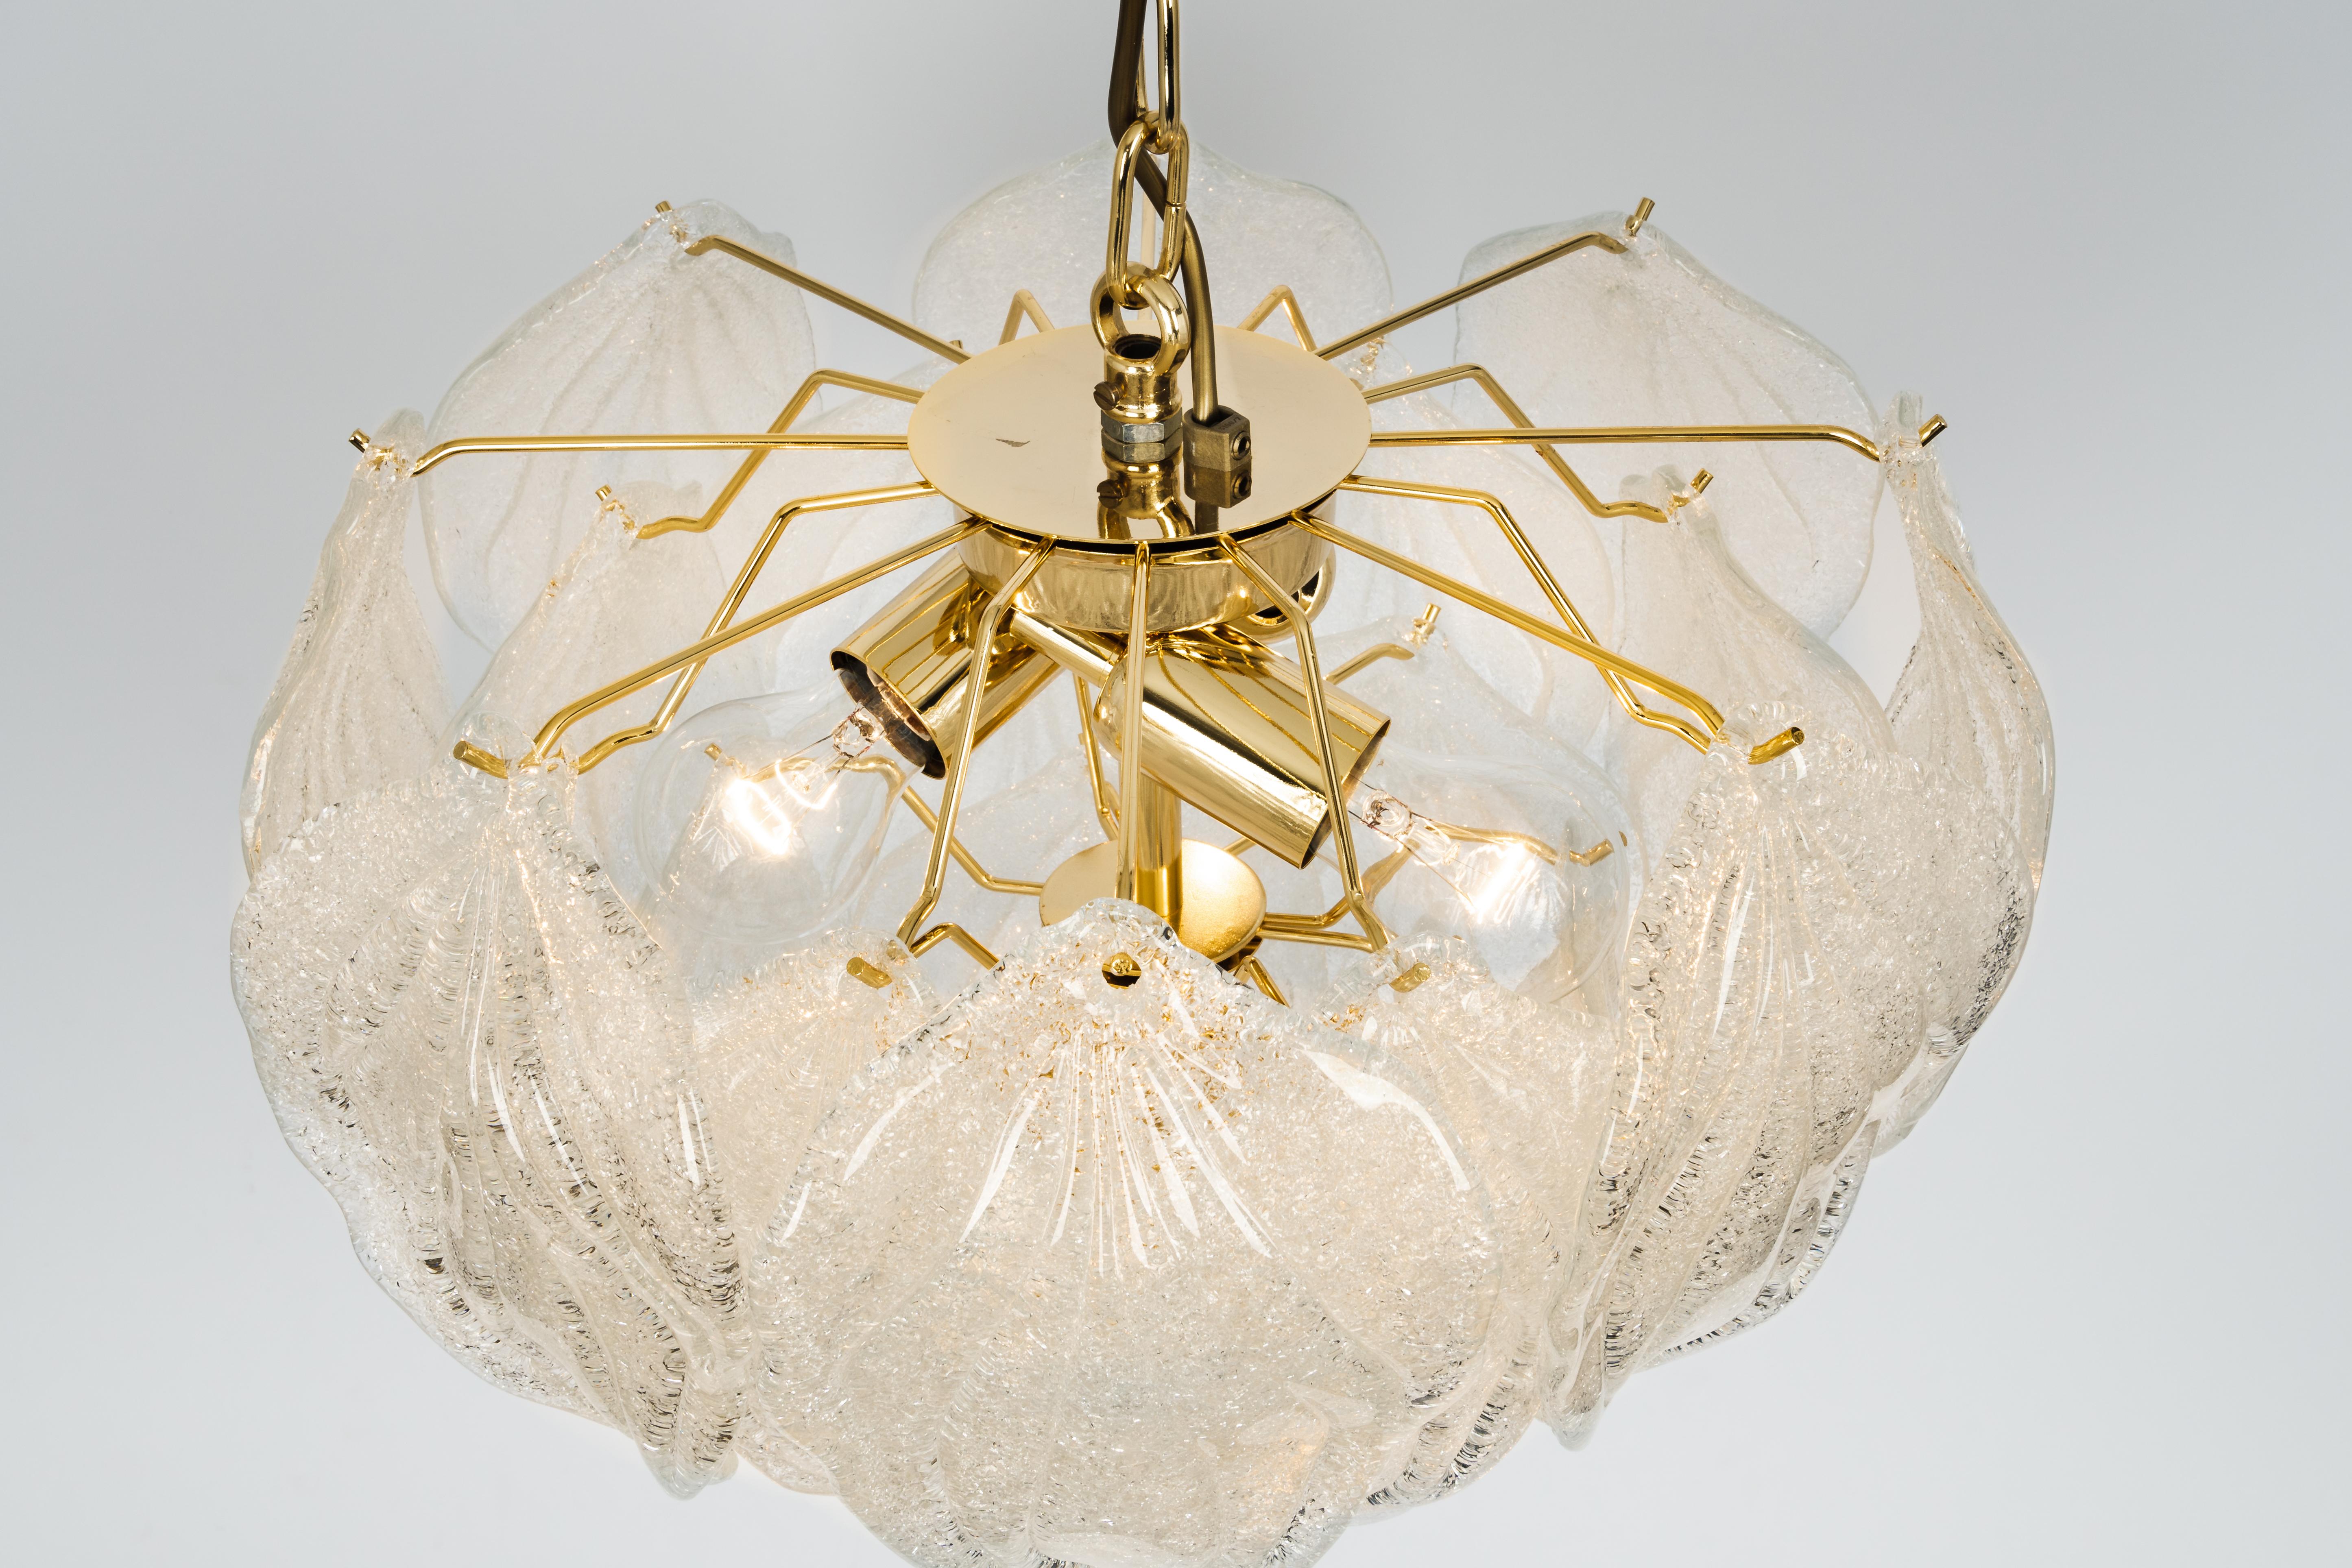 A stunning Murano glass chandelier designed by Carlo Nason for Mazzega, Italy, manufactured in the 1970s.
The chandelier is composed of 19 thick textured glass elements attached to a brass metal frame.

High quality, very good condition. Cleaned,